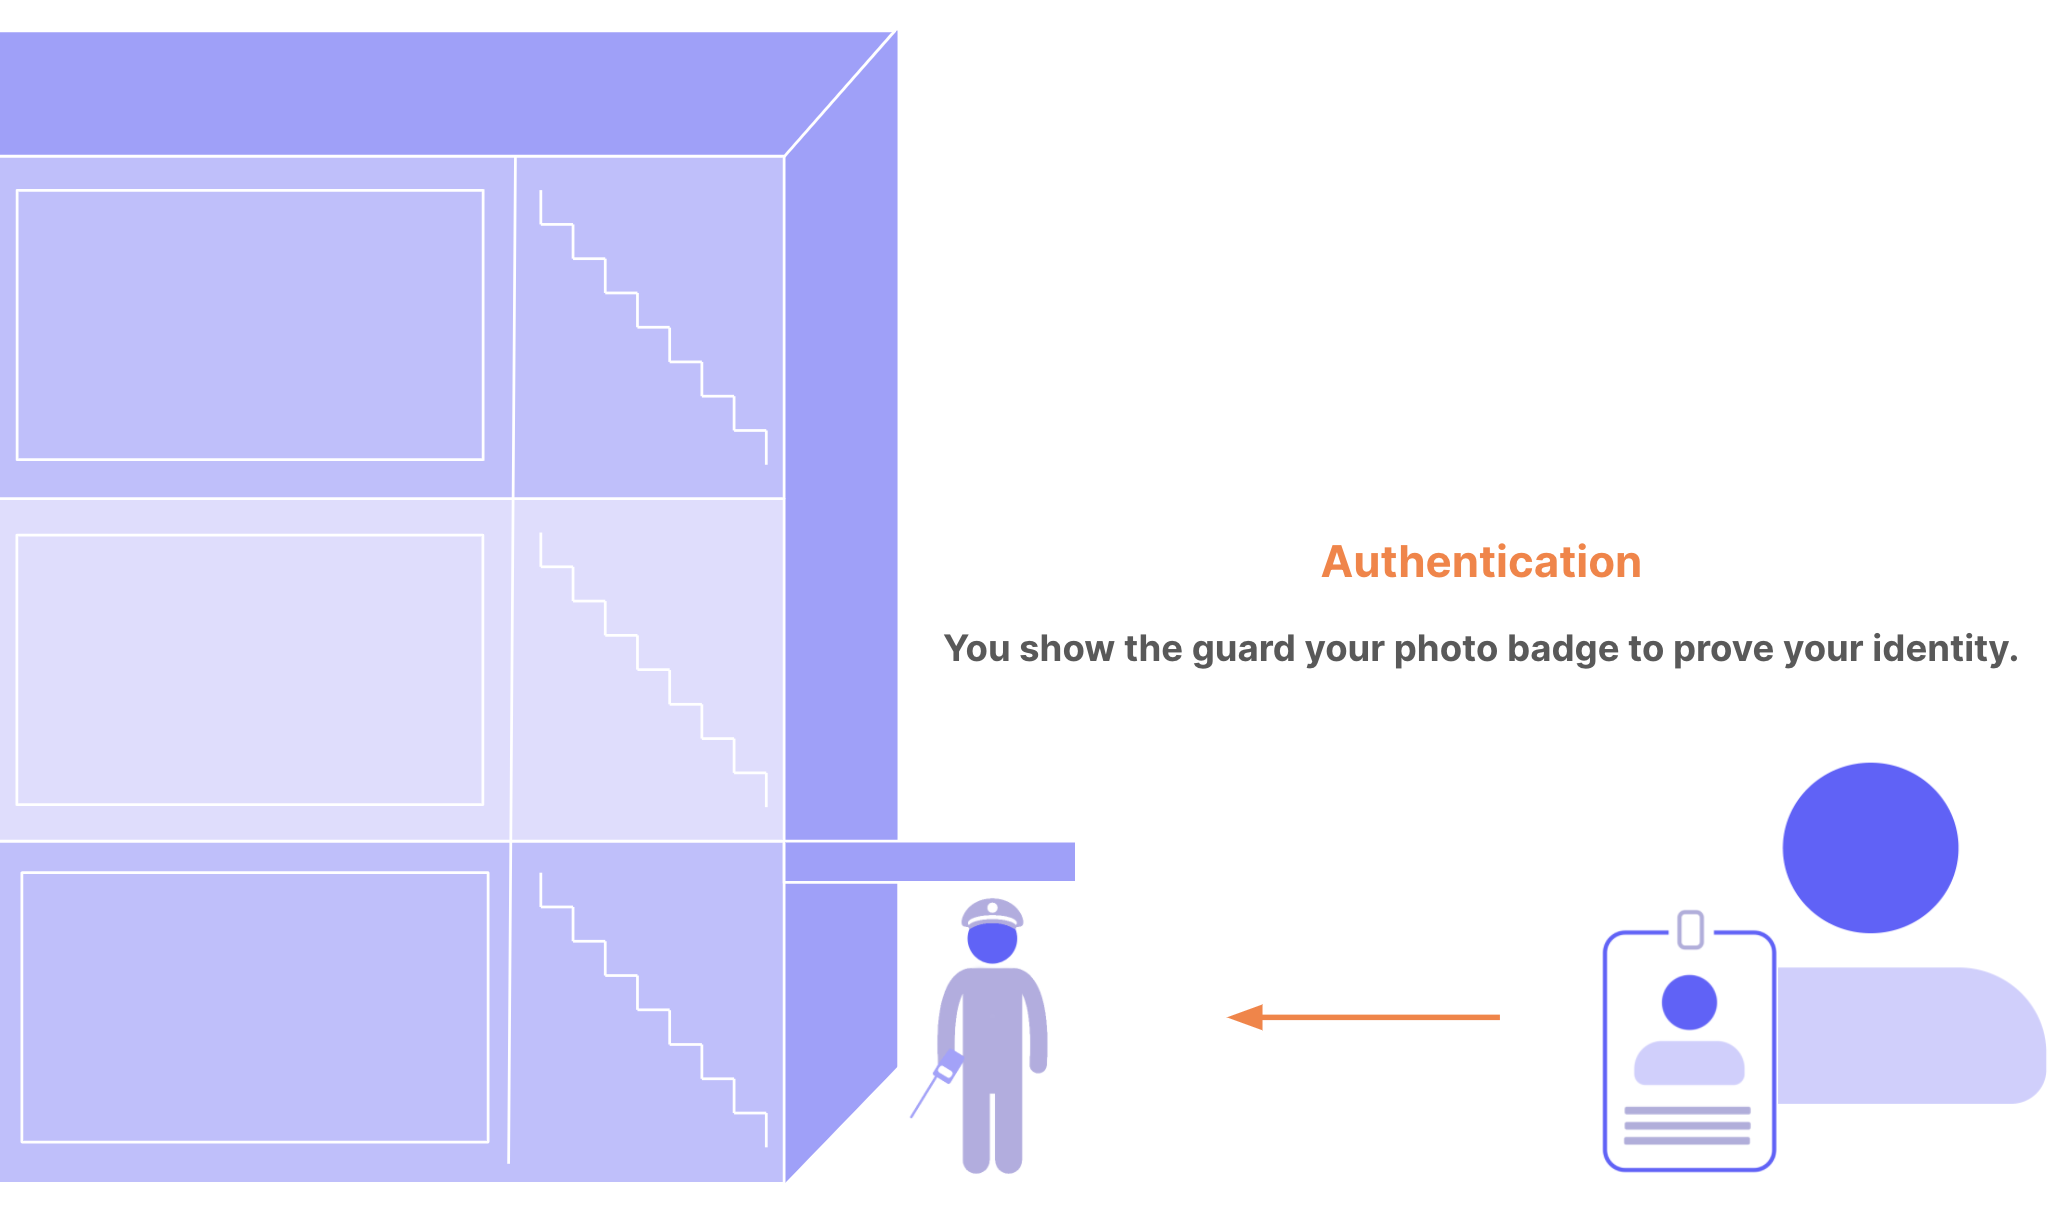 Diagram showing how authentication is like a security guard checking your badge at the door